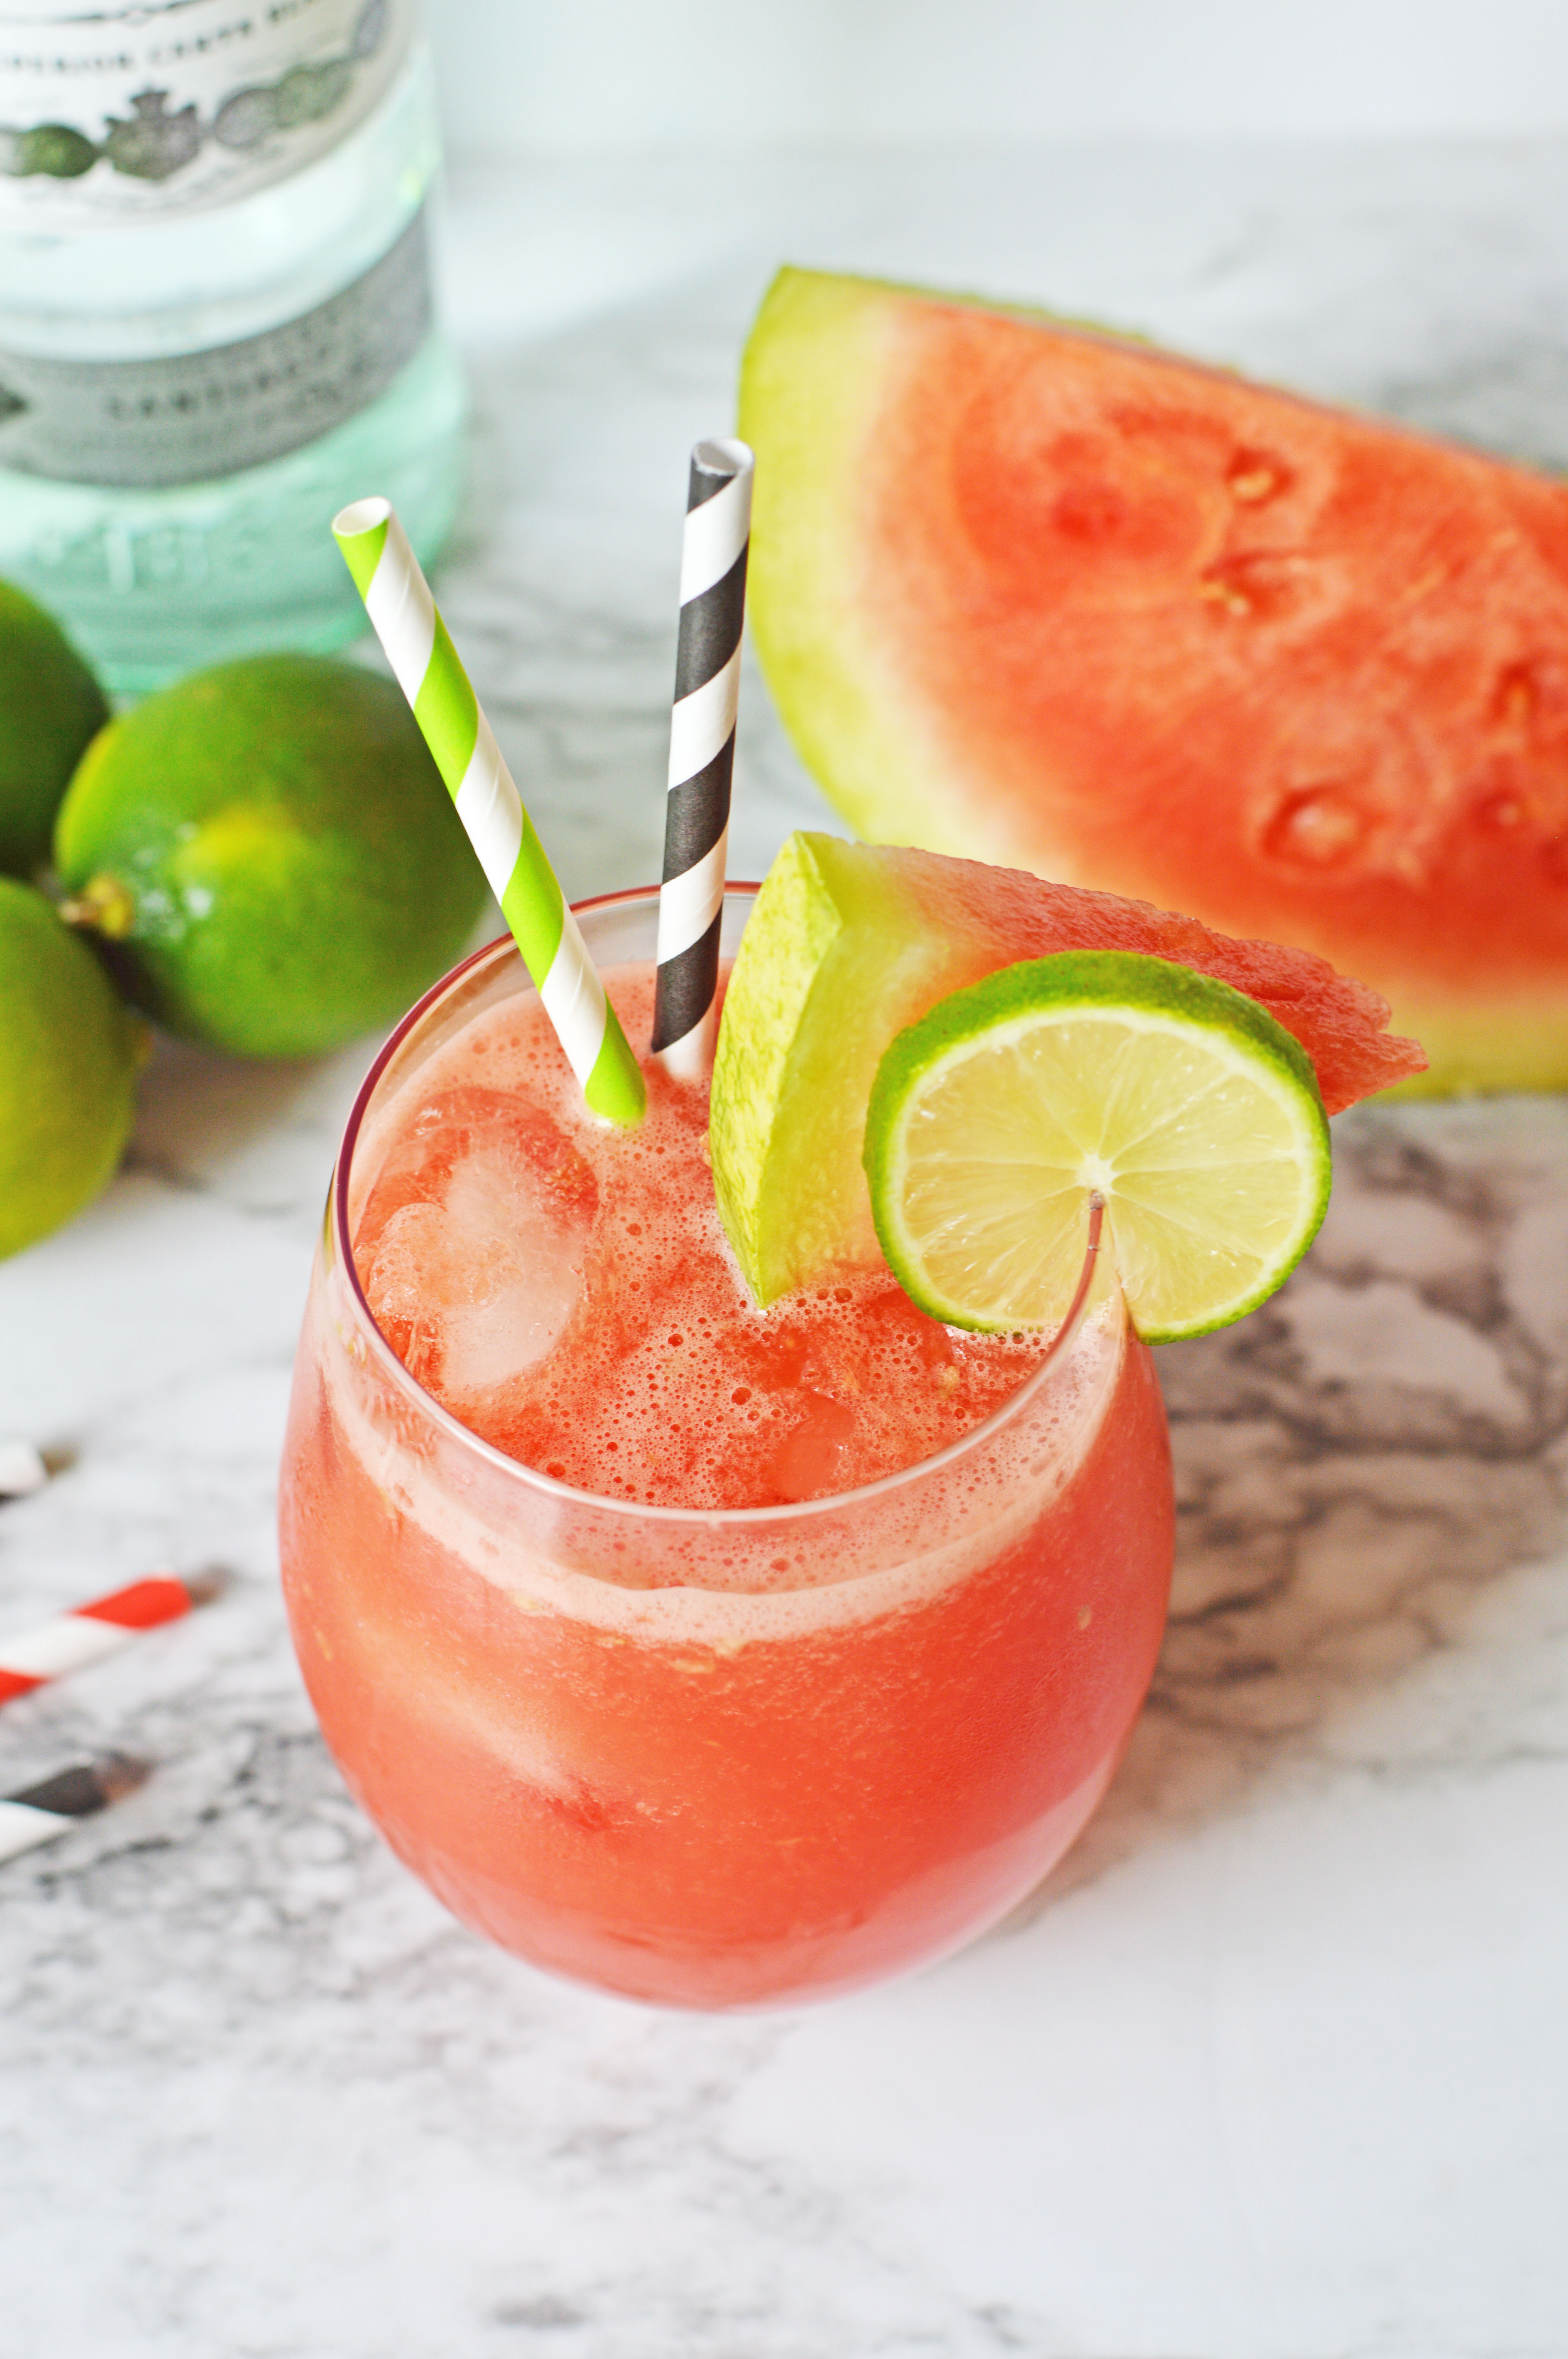 This Watermelon Rum Punch drink is perfect for barbecues, poolside parties, and picnics on sweltering hot summer days. Refreshingly fruity and delightfully sweet, this is one of my favourite summer drinks. Ready in 5 minutes, this 5 ingredient watermelon rum punch is ideal for last-minute party planning too!